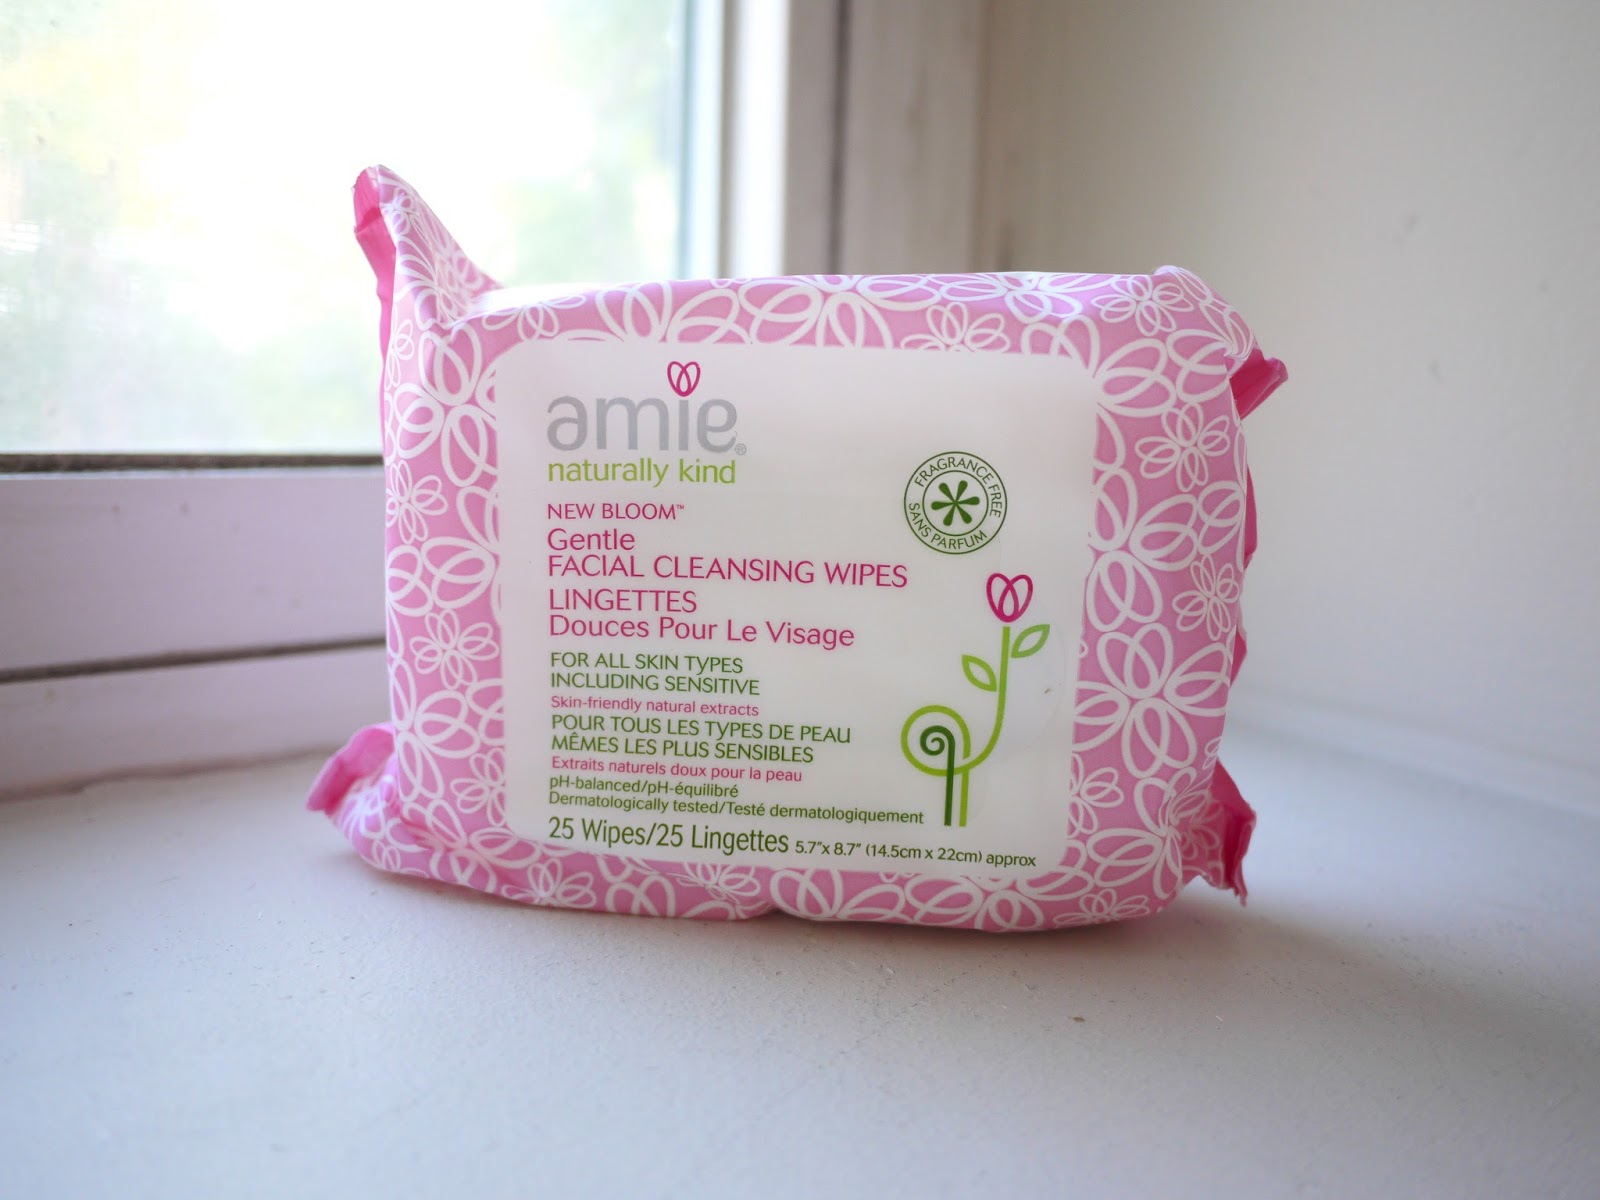 amie skincare morning clear purifying facial wash new bloom gentle facial cleansing wipes review